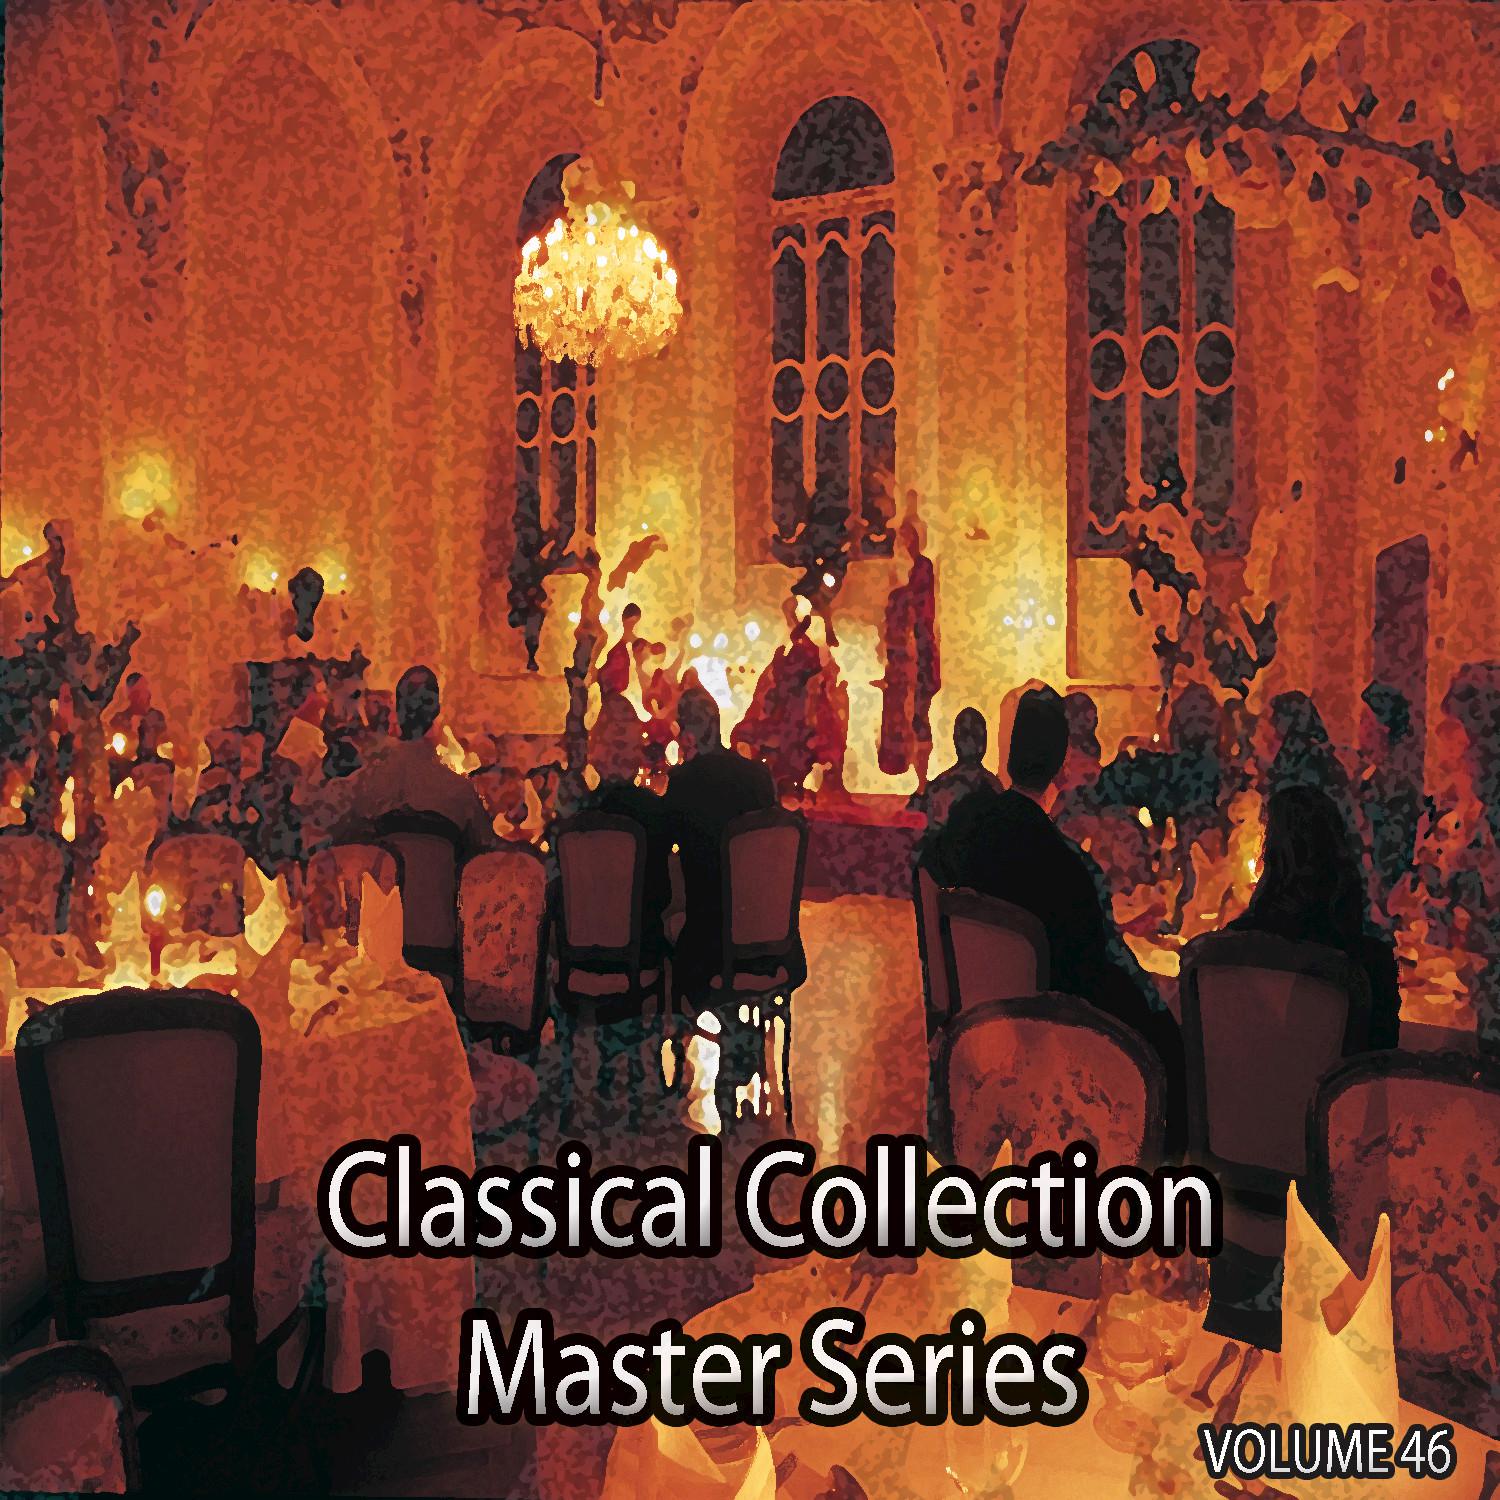 Symphony for Cello and Orchestra, Op. 68: III. Adagio, Cadenza, Pt. 1